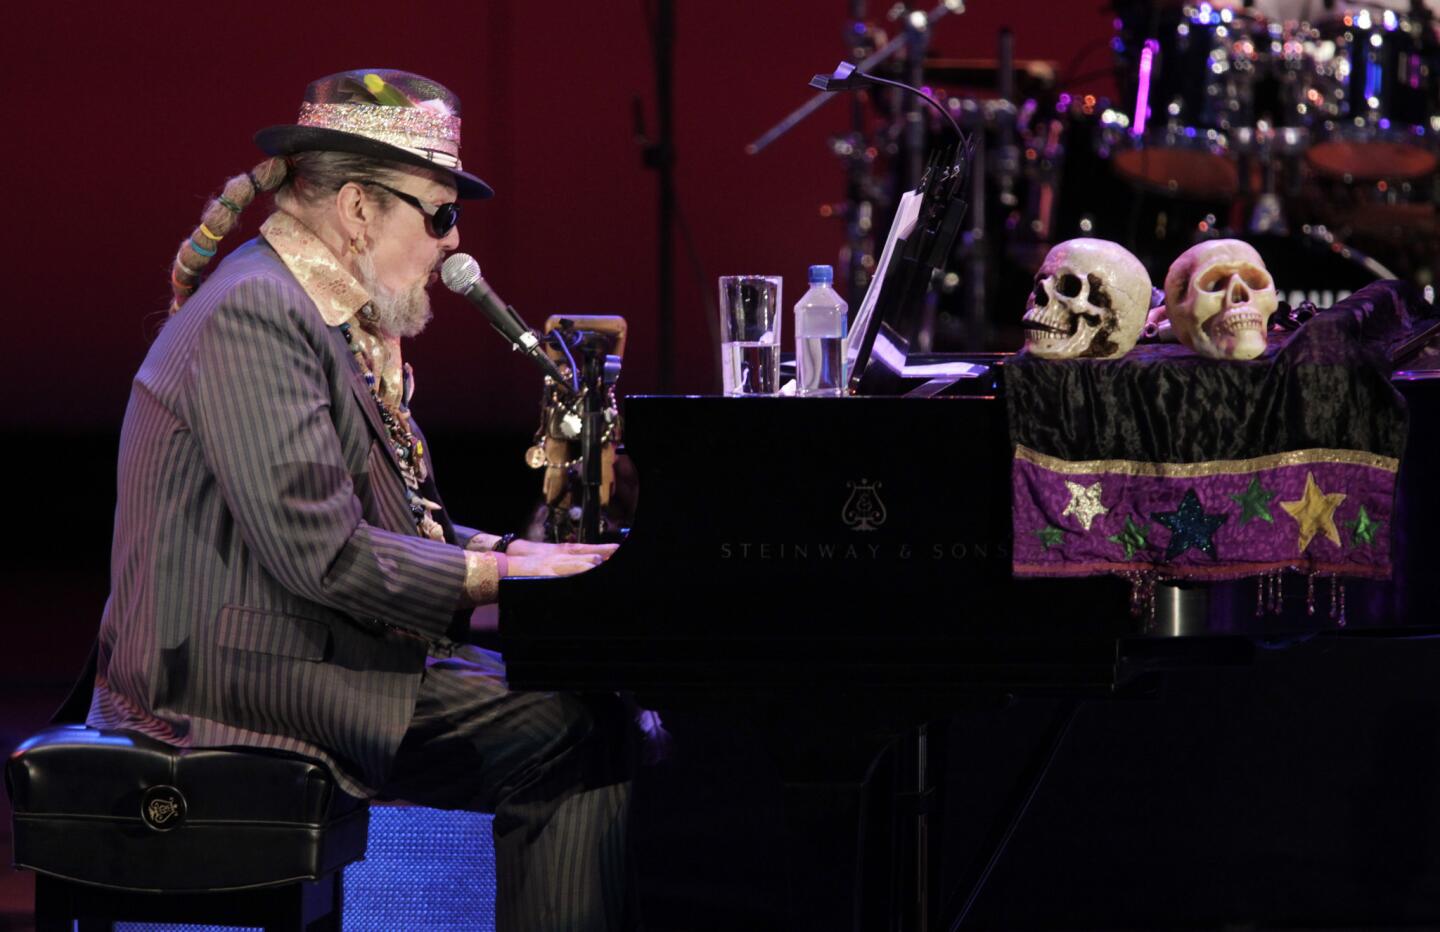 Dr. John, New Orleans keyboardist-bandleader, along with the Nite Trippers, Nicholas Payton, Terence Blanchard, Marcus Belgrave, the Blind Boys of Alabama, Dee Dee Bridgewater and others, performs during the "Props to Pops: Dr. John's Tribute to Louis Armstrong" at the Hollywood Bowl.